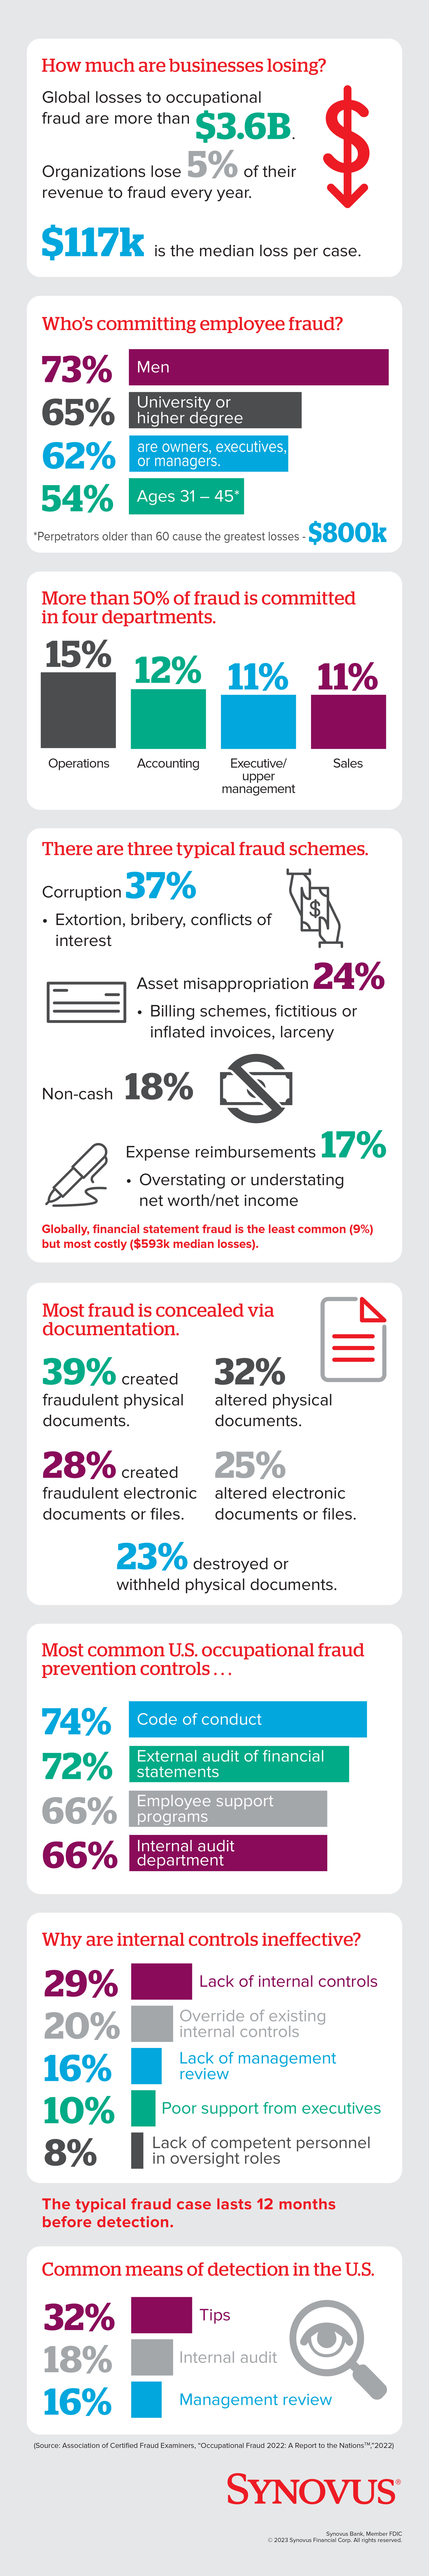 Infographic describing employee fraud. A full description of the infographic is available through a link beneath the image.